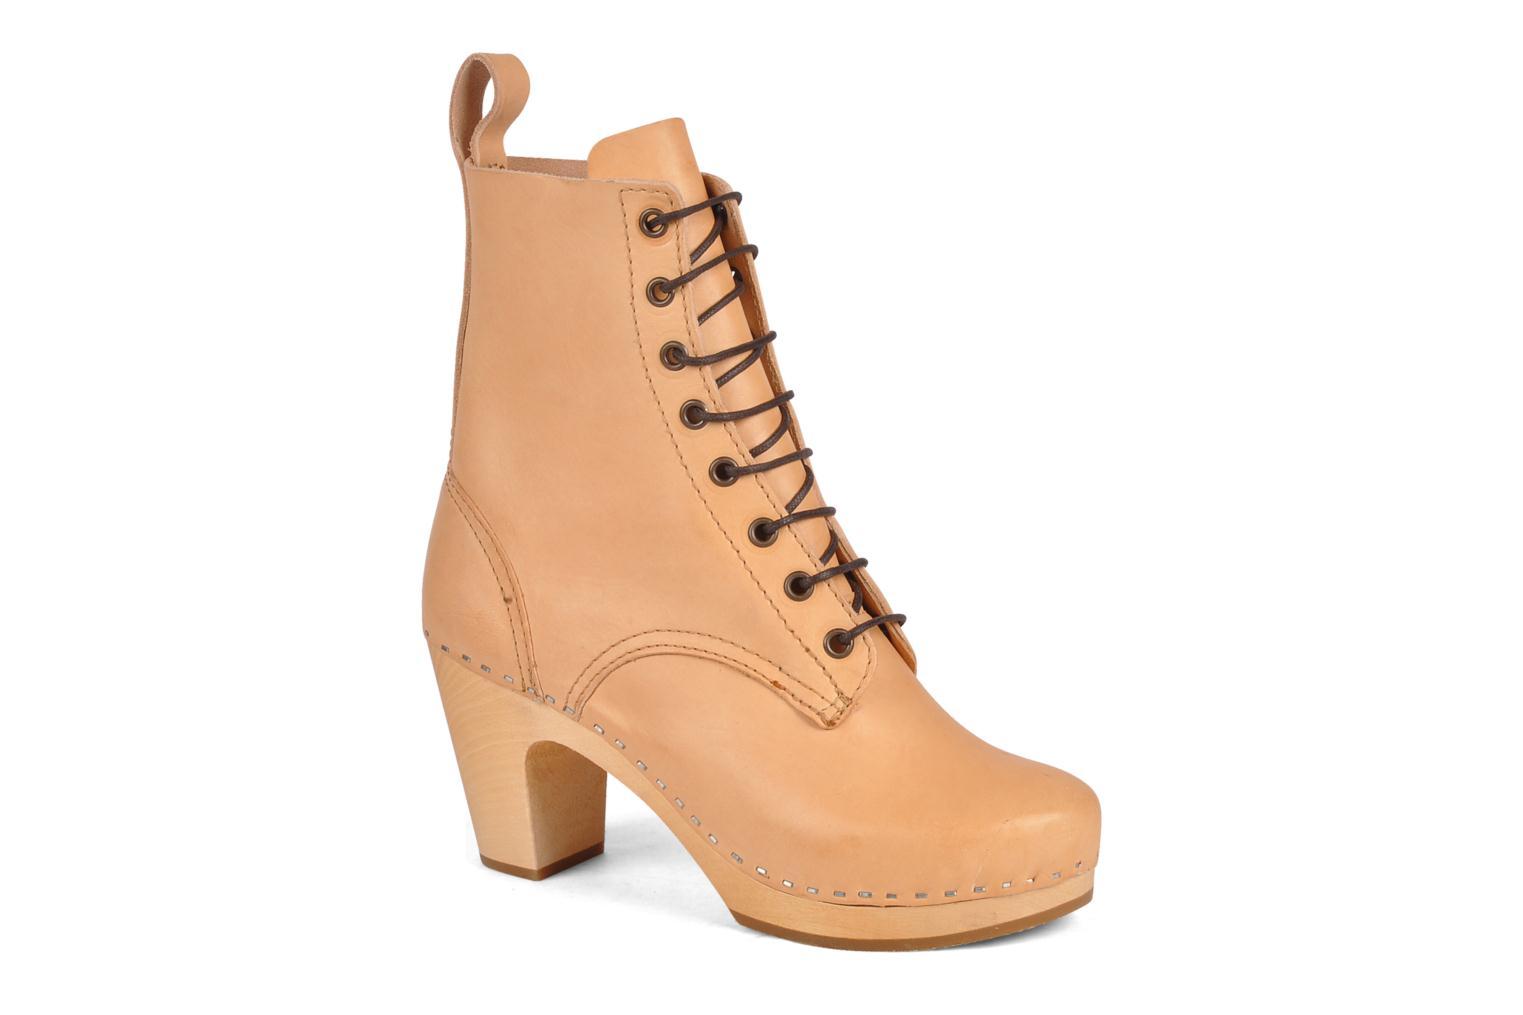 Foto Boots y Botines Swedish Hasbeens Lace up super high Mujer foto 387844